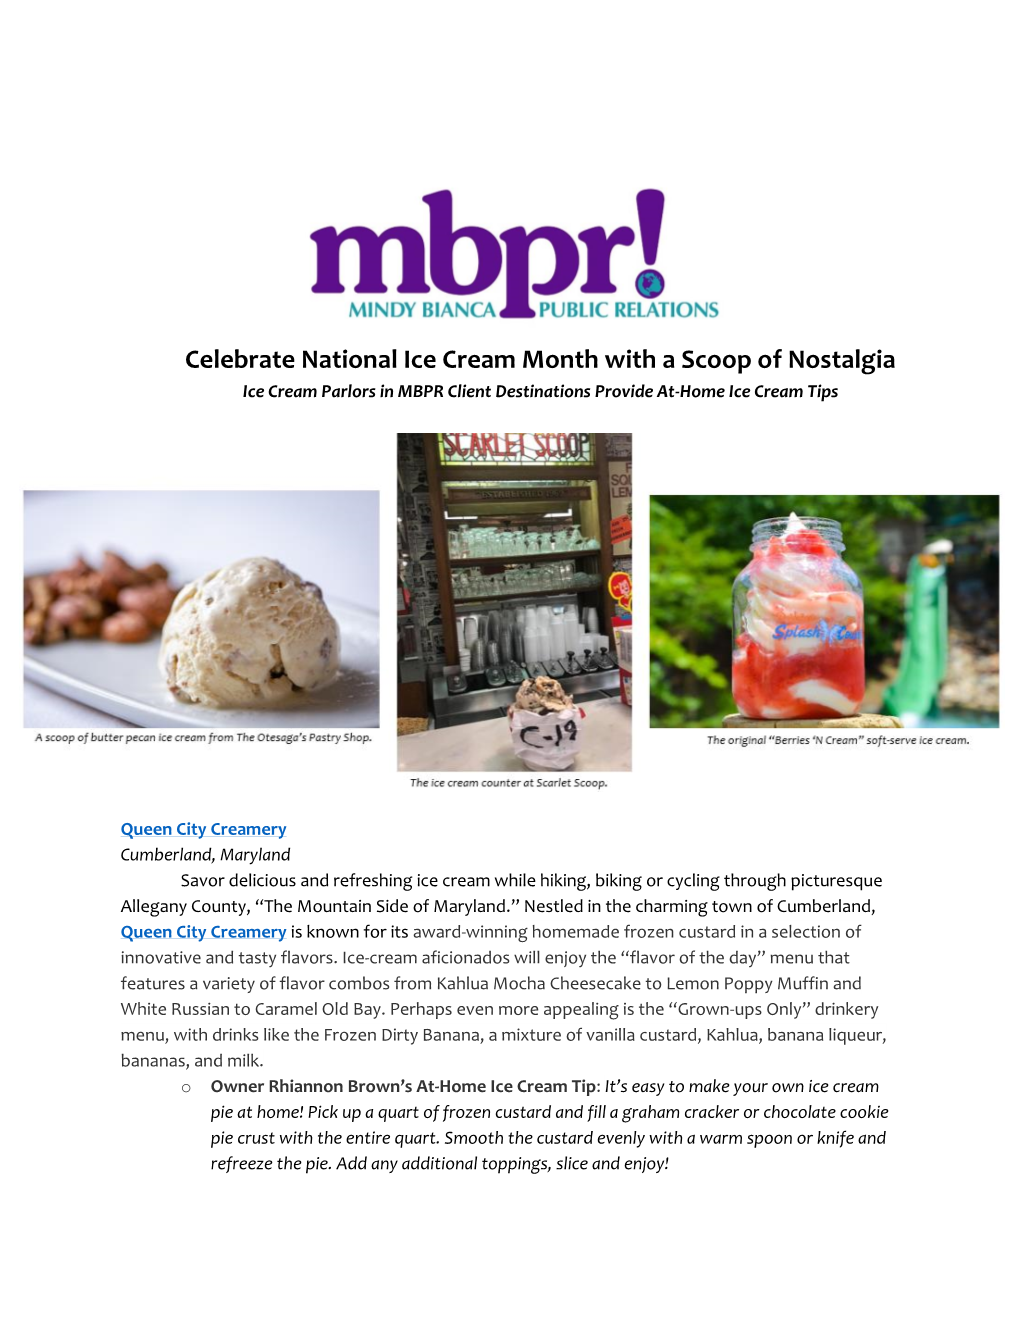 Celebrate National Ice Cream Month with a Scoop of Nostalgia Ice Cream Parlors in MBPR Client Destinations Provide At-Home Ice Cream Tips